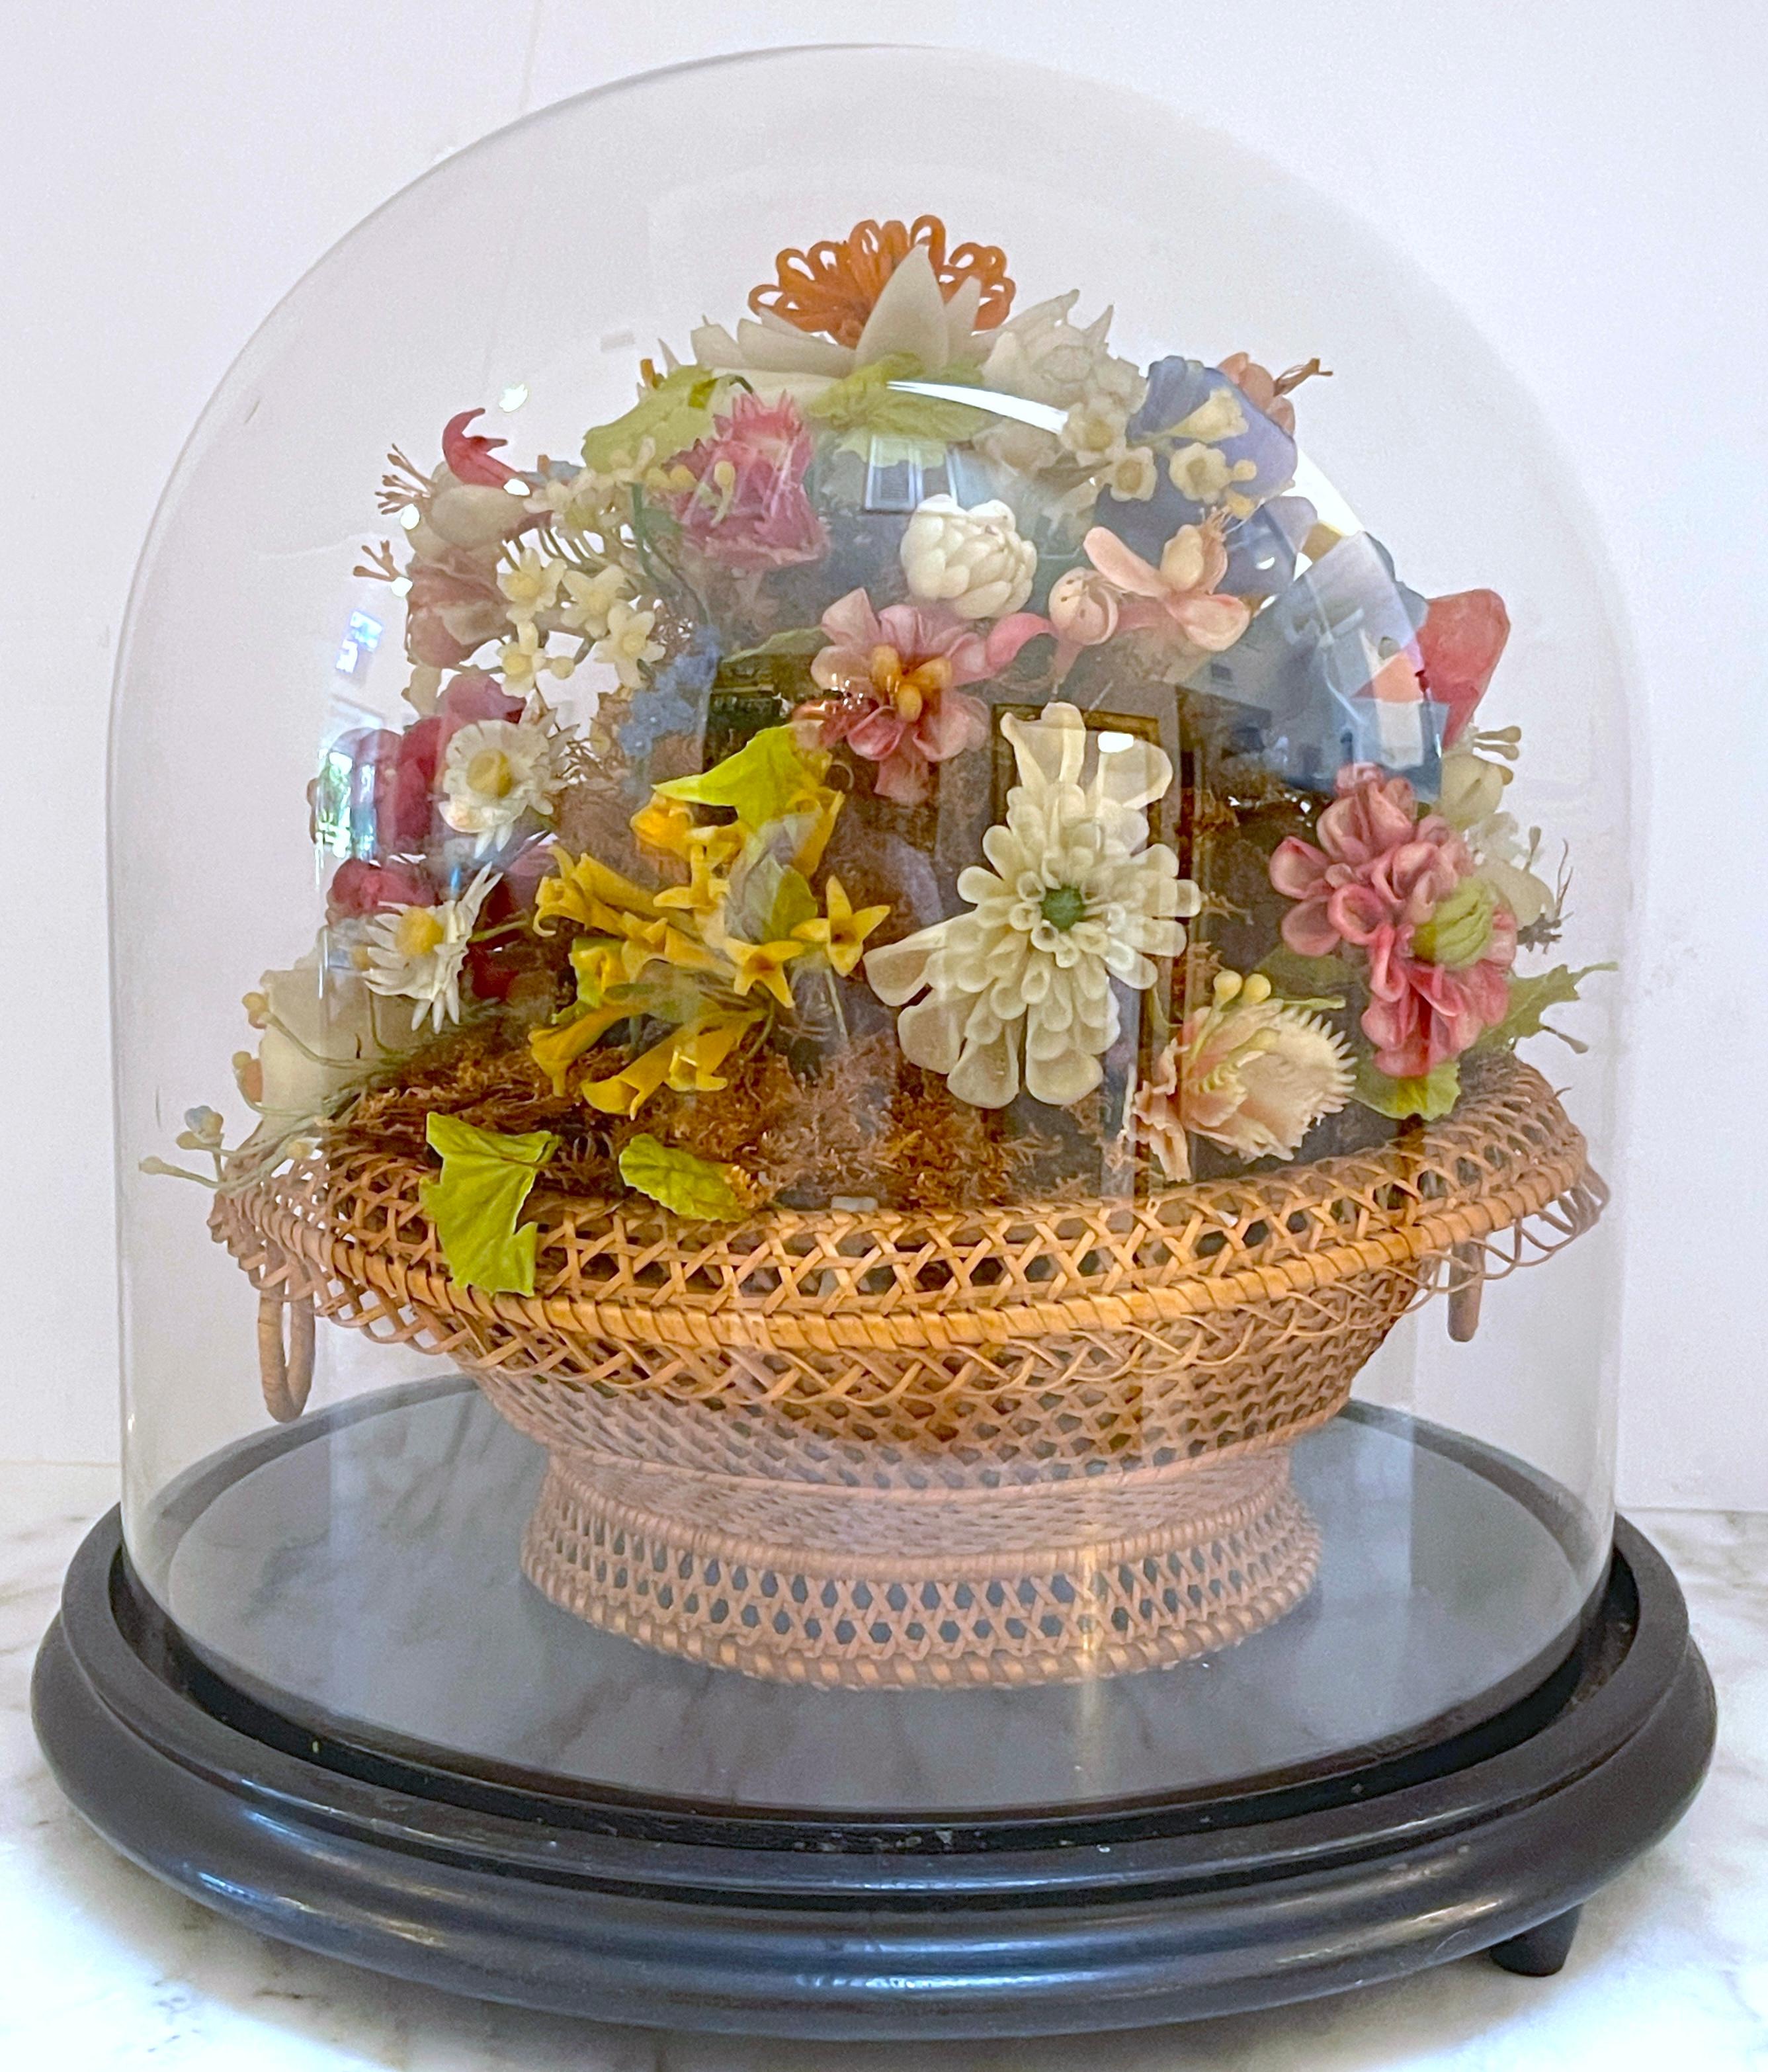 Victorian Wax Flower Still Life Basket Under Round Glass Dome
USA, Circa 1880 

A glimpse of  the opulent world of the 19th century with this captivating Victorian wax flower still life basket, a testament to unparalleled artistry from the USA circa